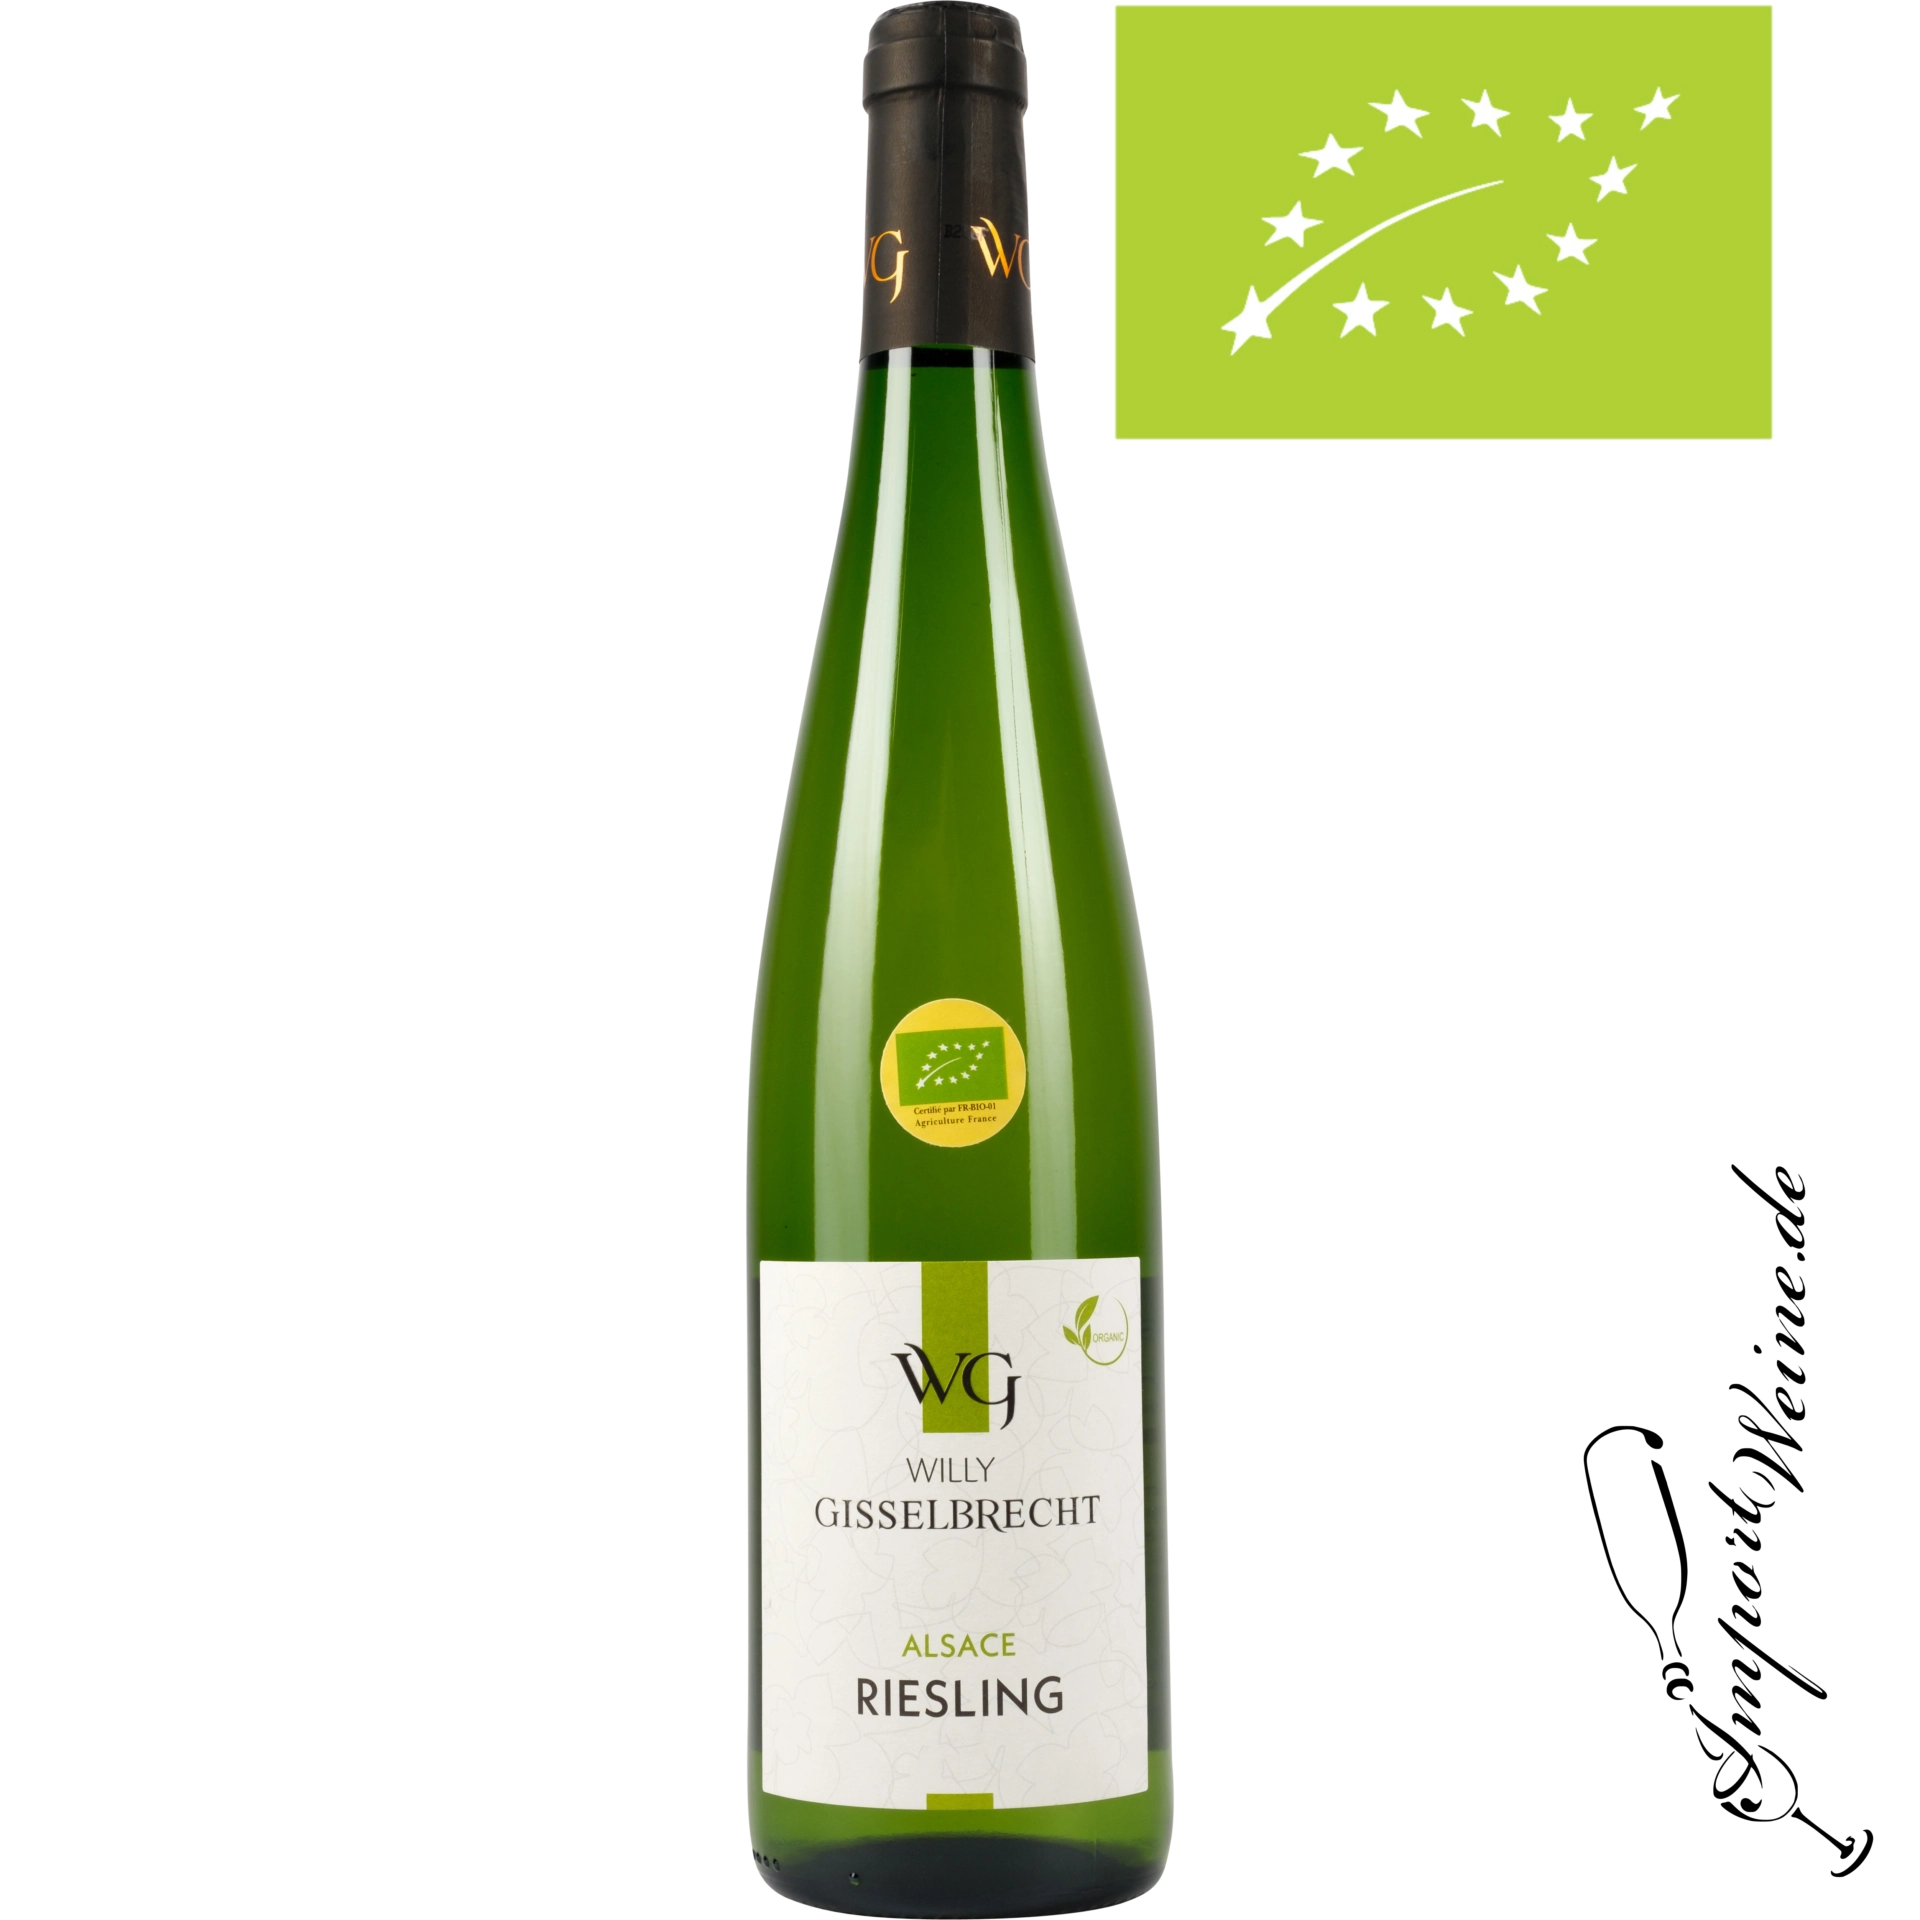 Willy Gisselbrecht Riesling Alsace BIO 2021